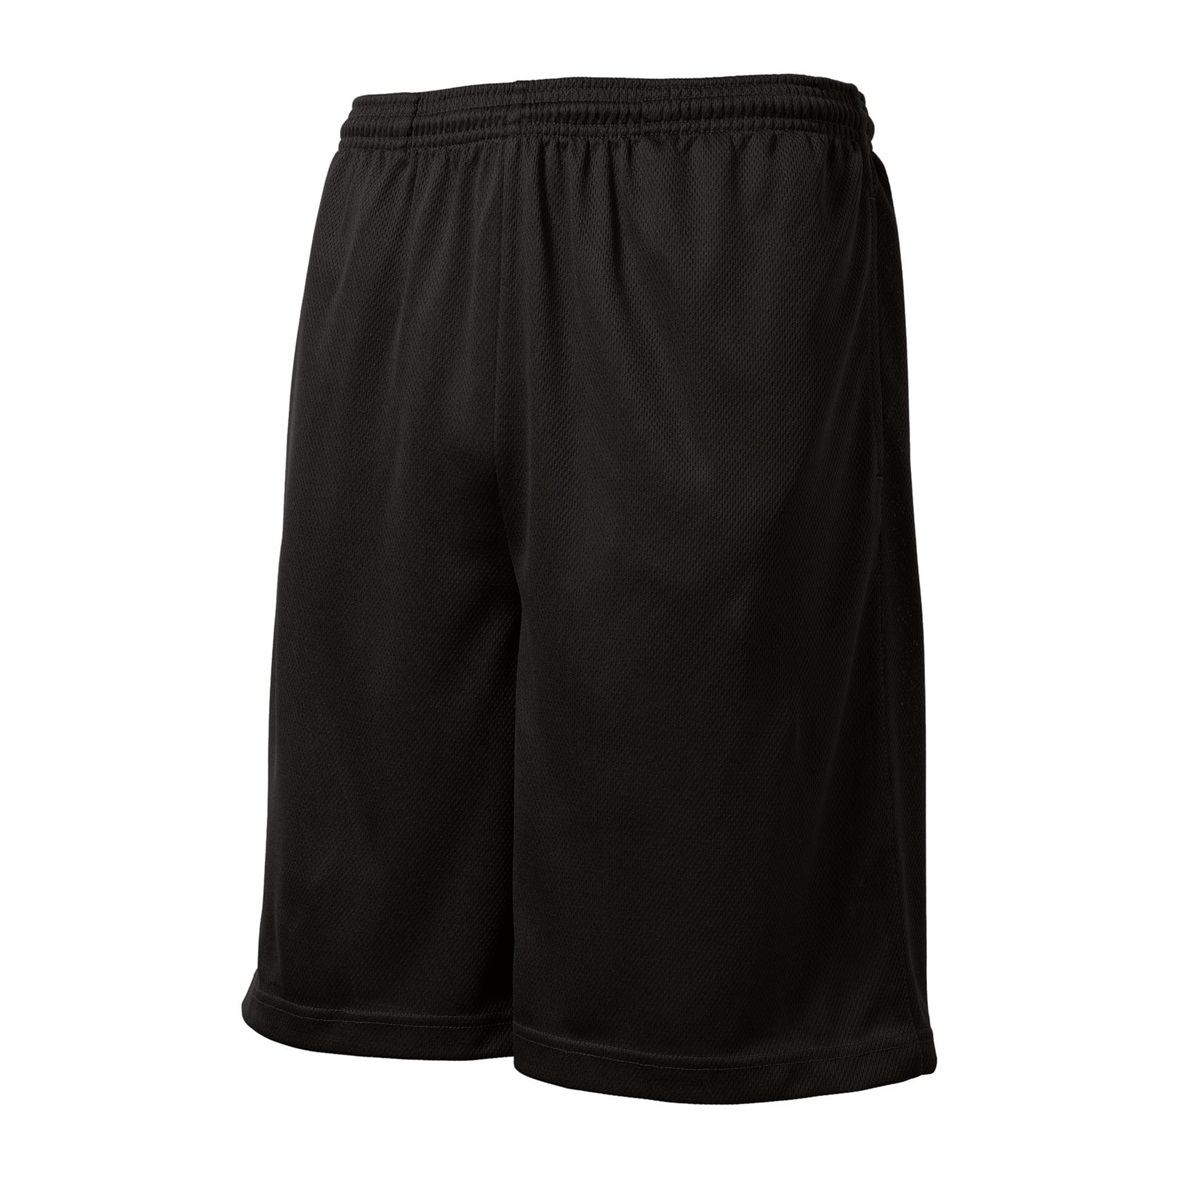 dry-wick-shorts